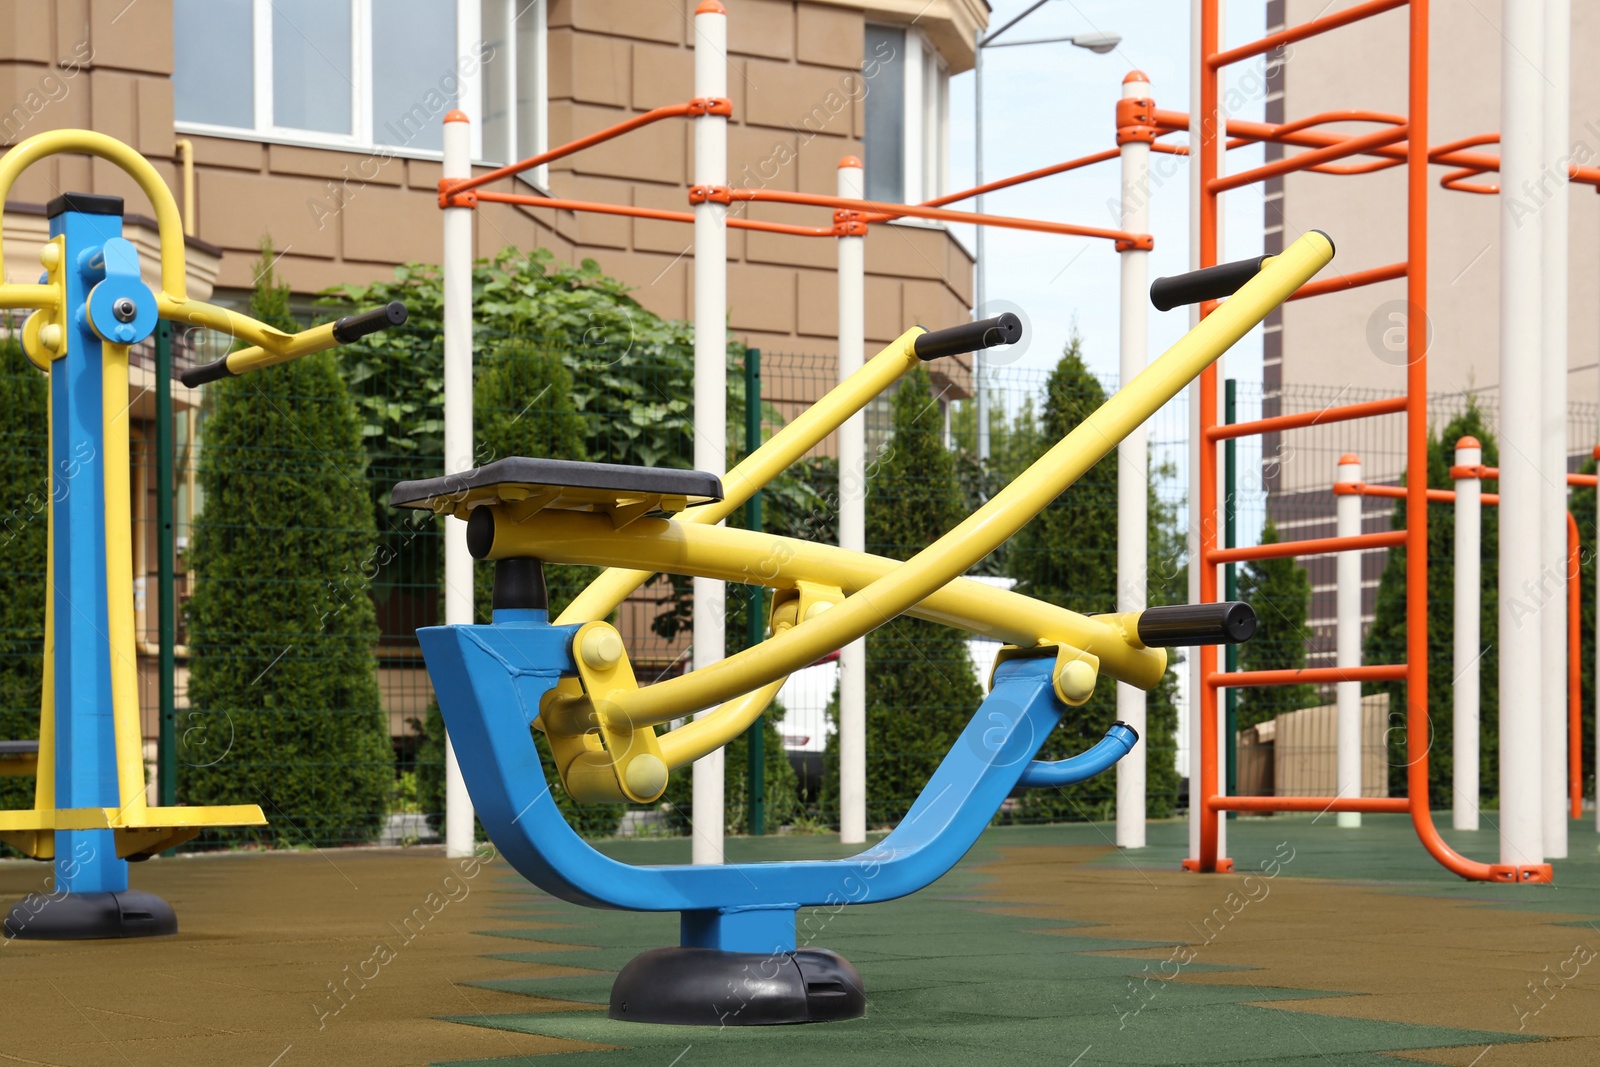 Photo of Empty outdoor playground with exercise equipment in residential area